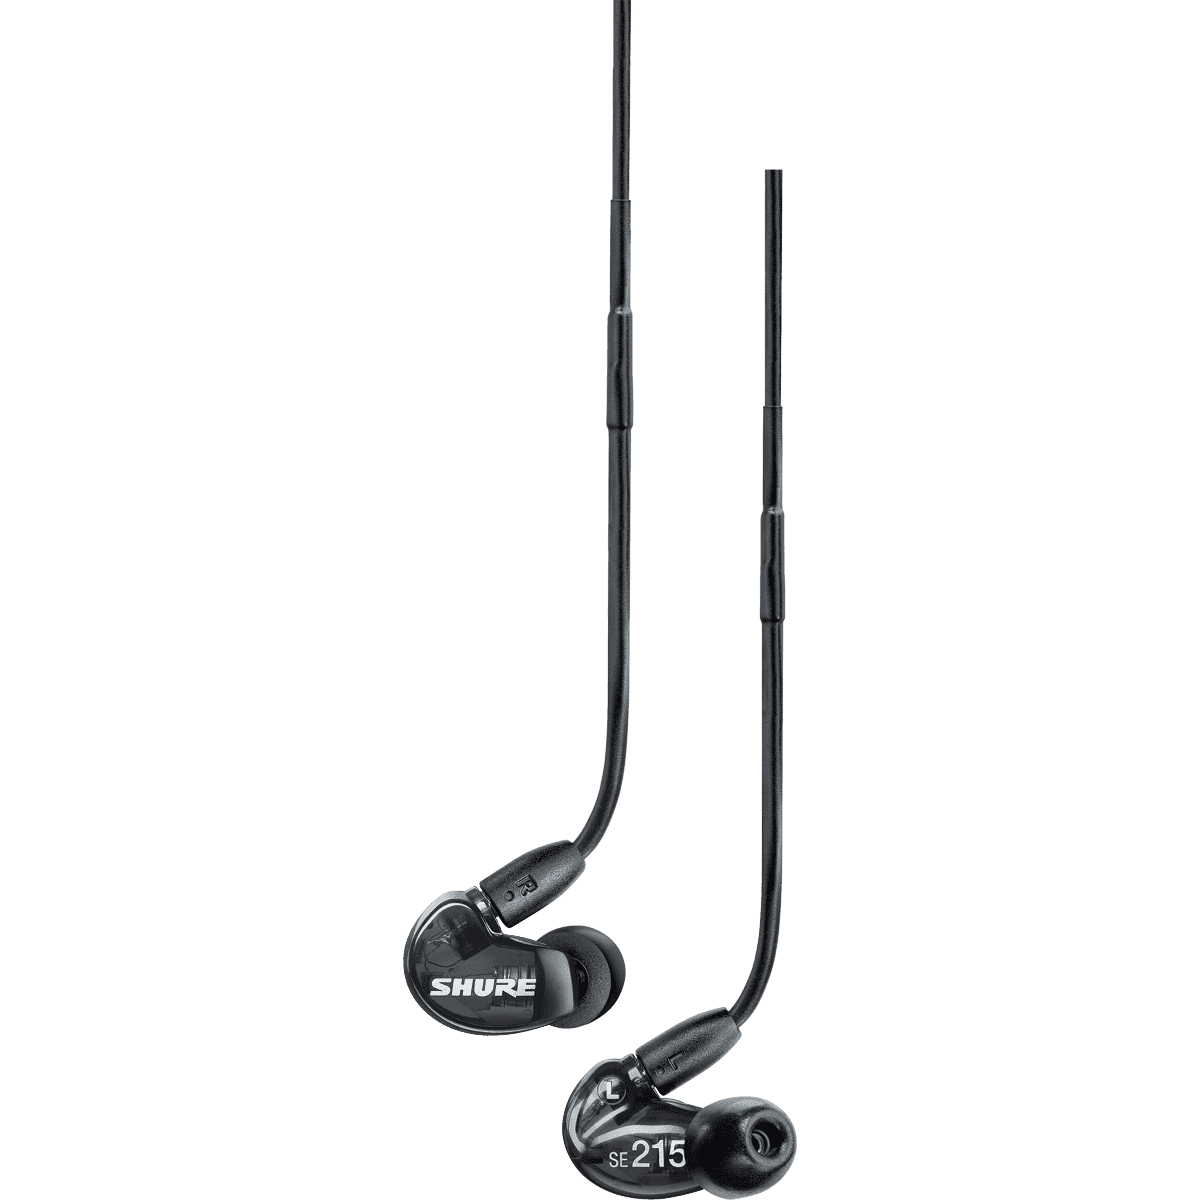 Casques intra auriculaires - Shure - SE215